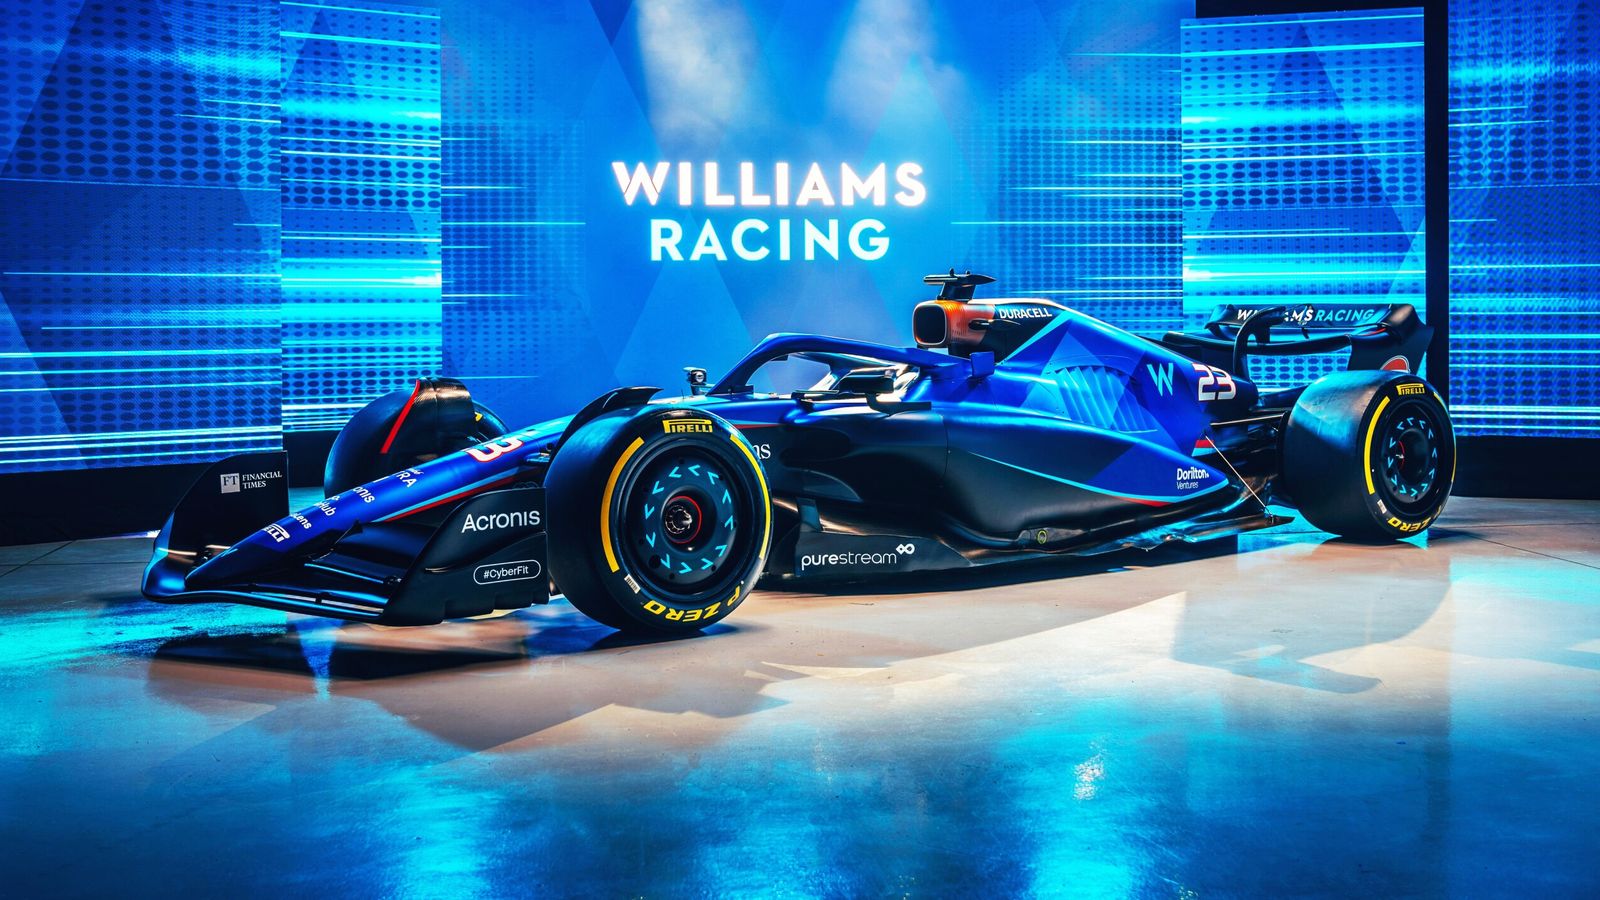 Williams F1 Demonstrating The Need for Powerful Database Solutions